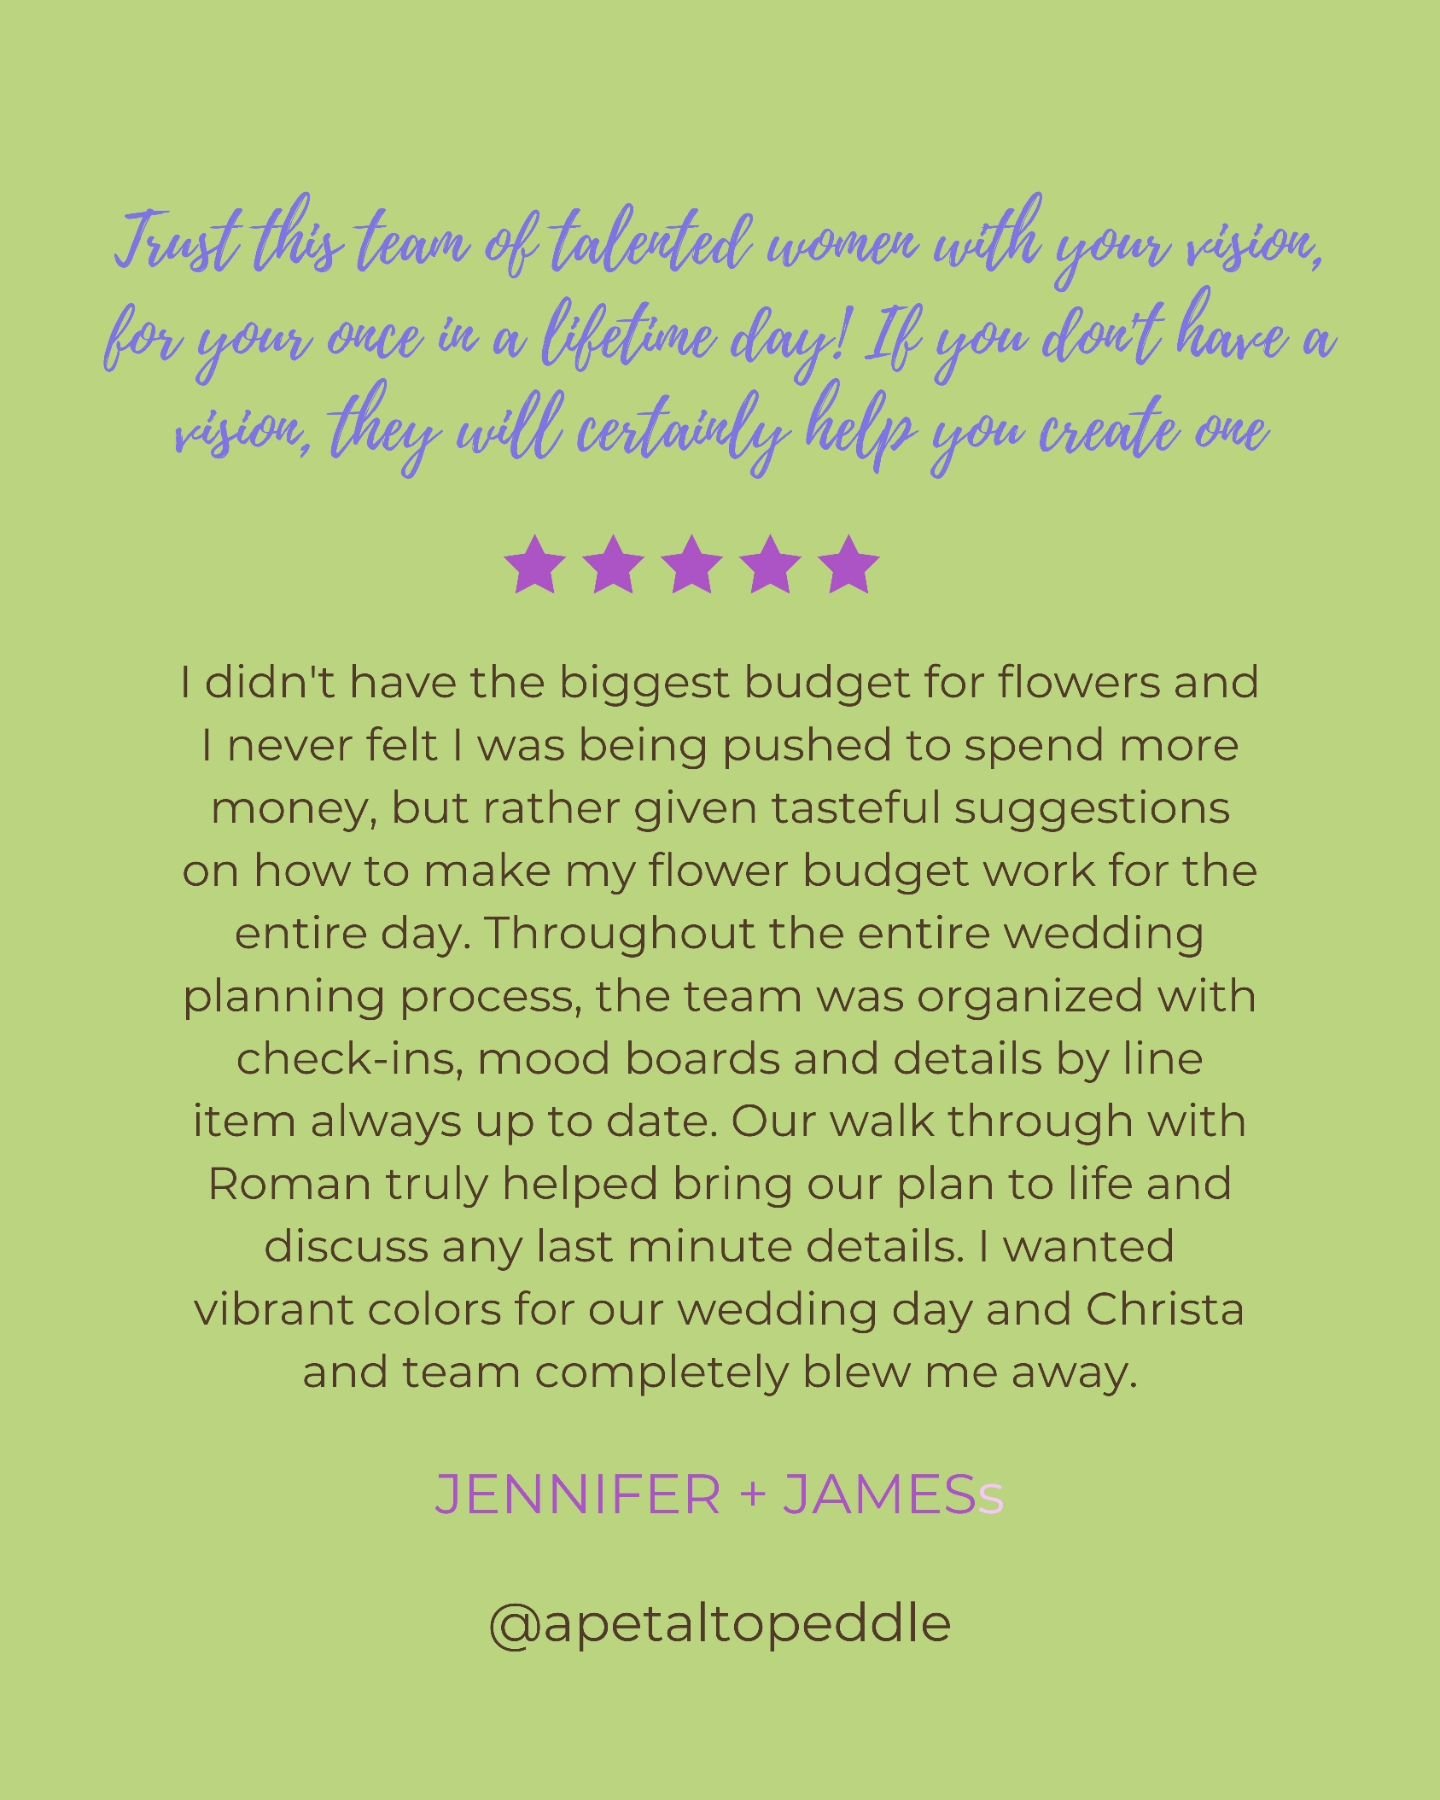 &ldquo;I can not say enough great things about A Petal To Peddle. Christa was so knowledgeable, kind, and took the time to answer any and all of my questions during our intro call. I didn't have the biggest budget for flowers, and I never felt I was 